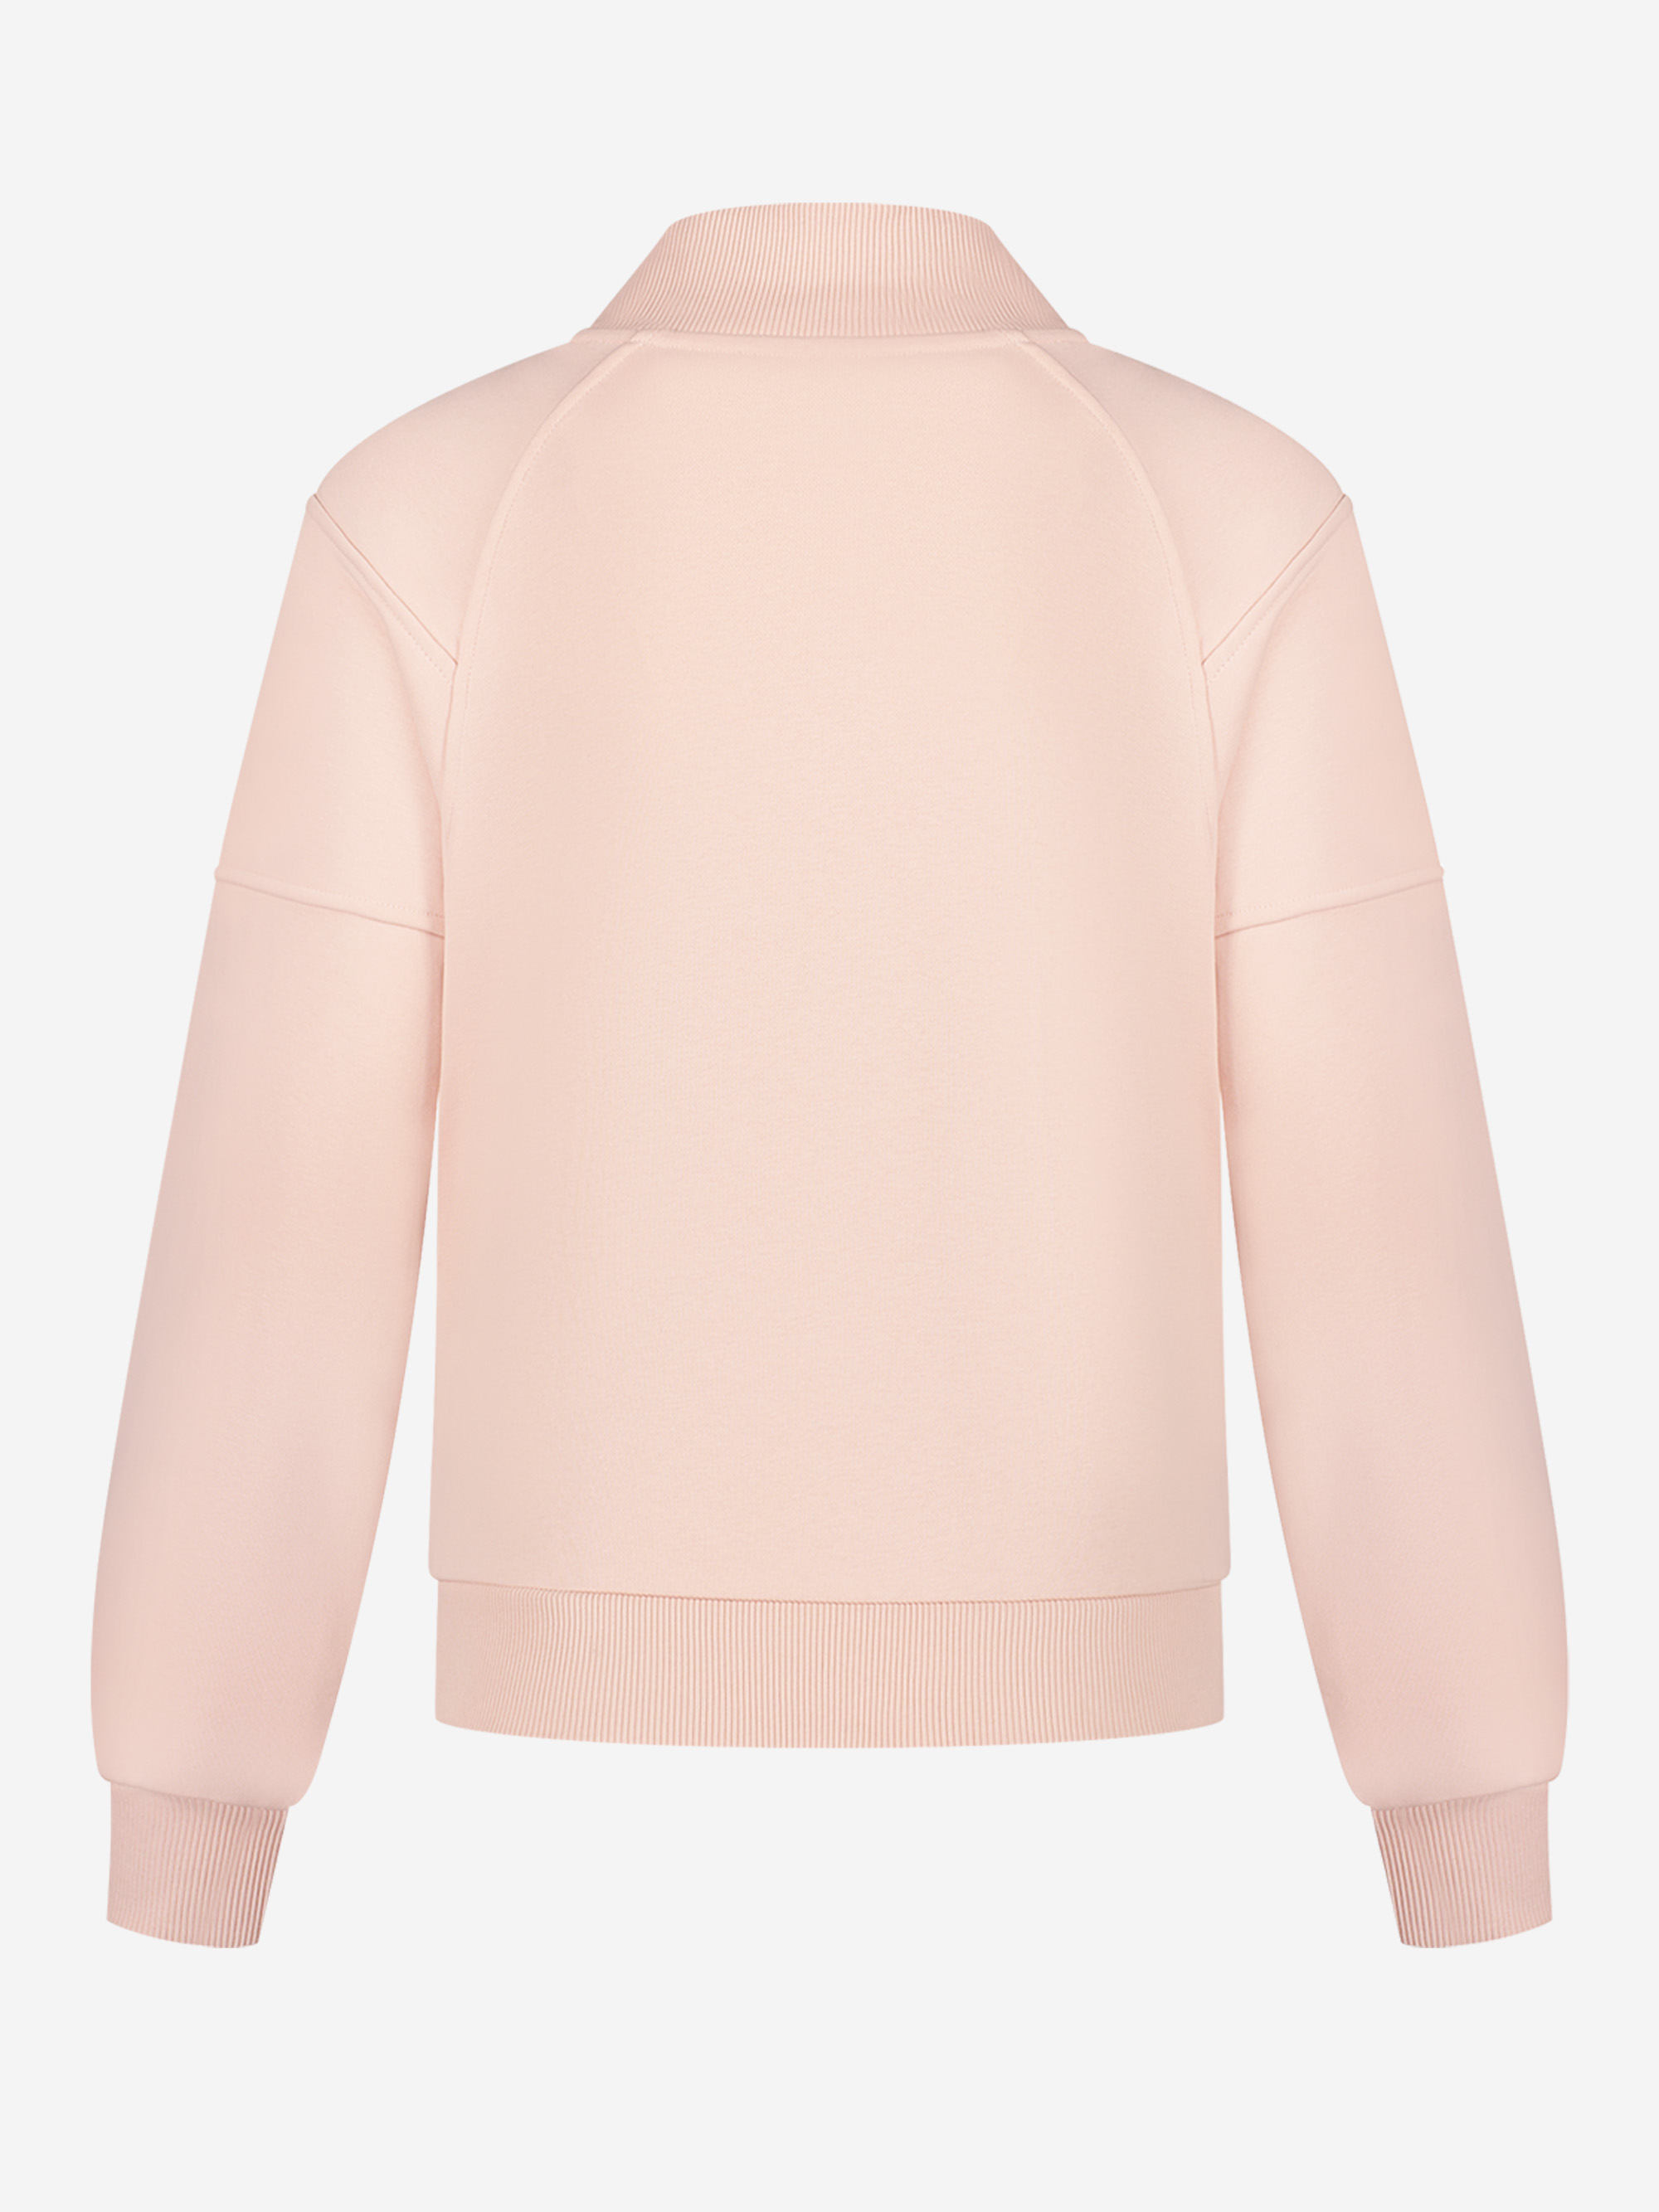 Sweater with high neck